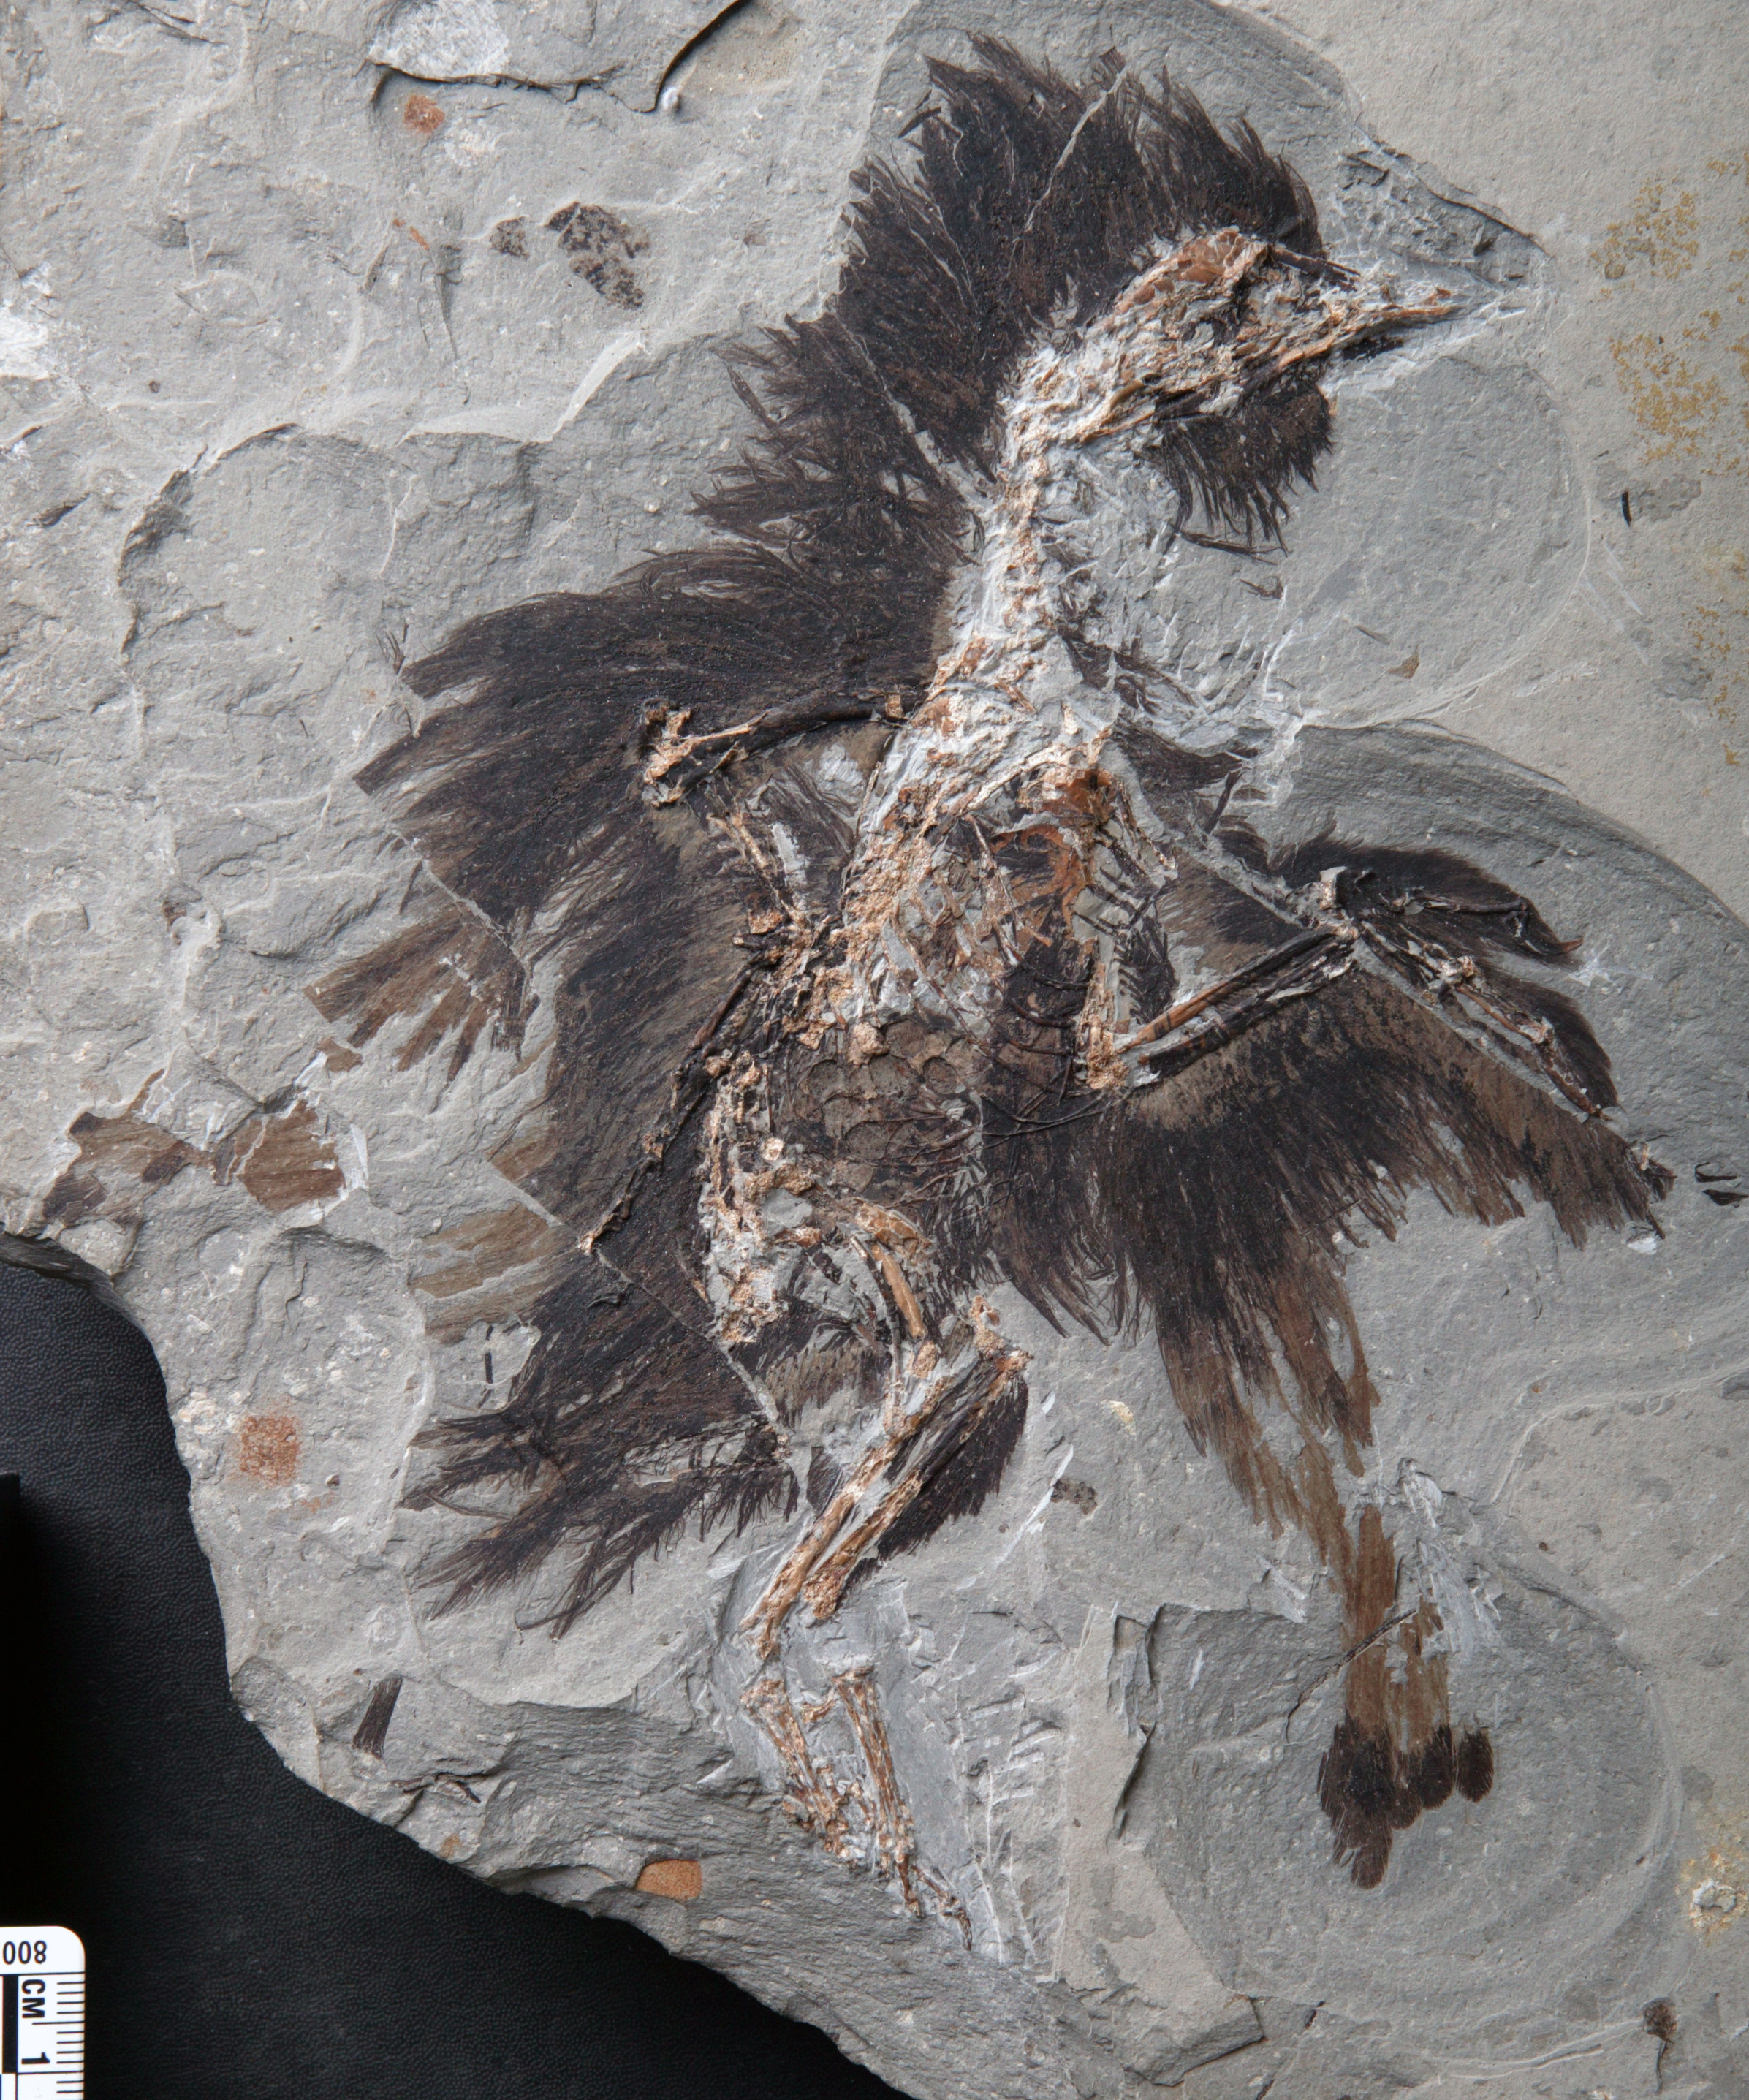 A fossil of Eoconfuciusornis, an ancient bird species